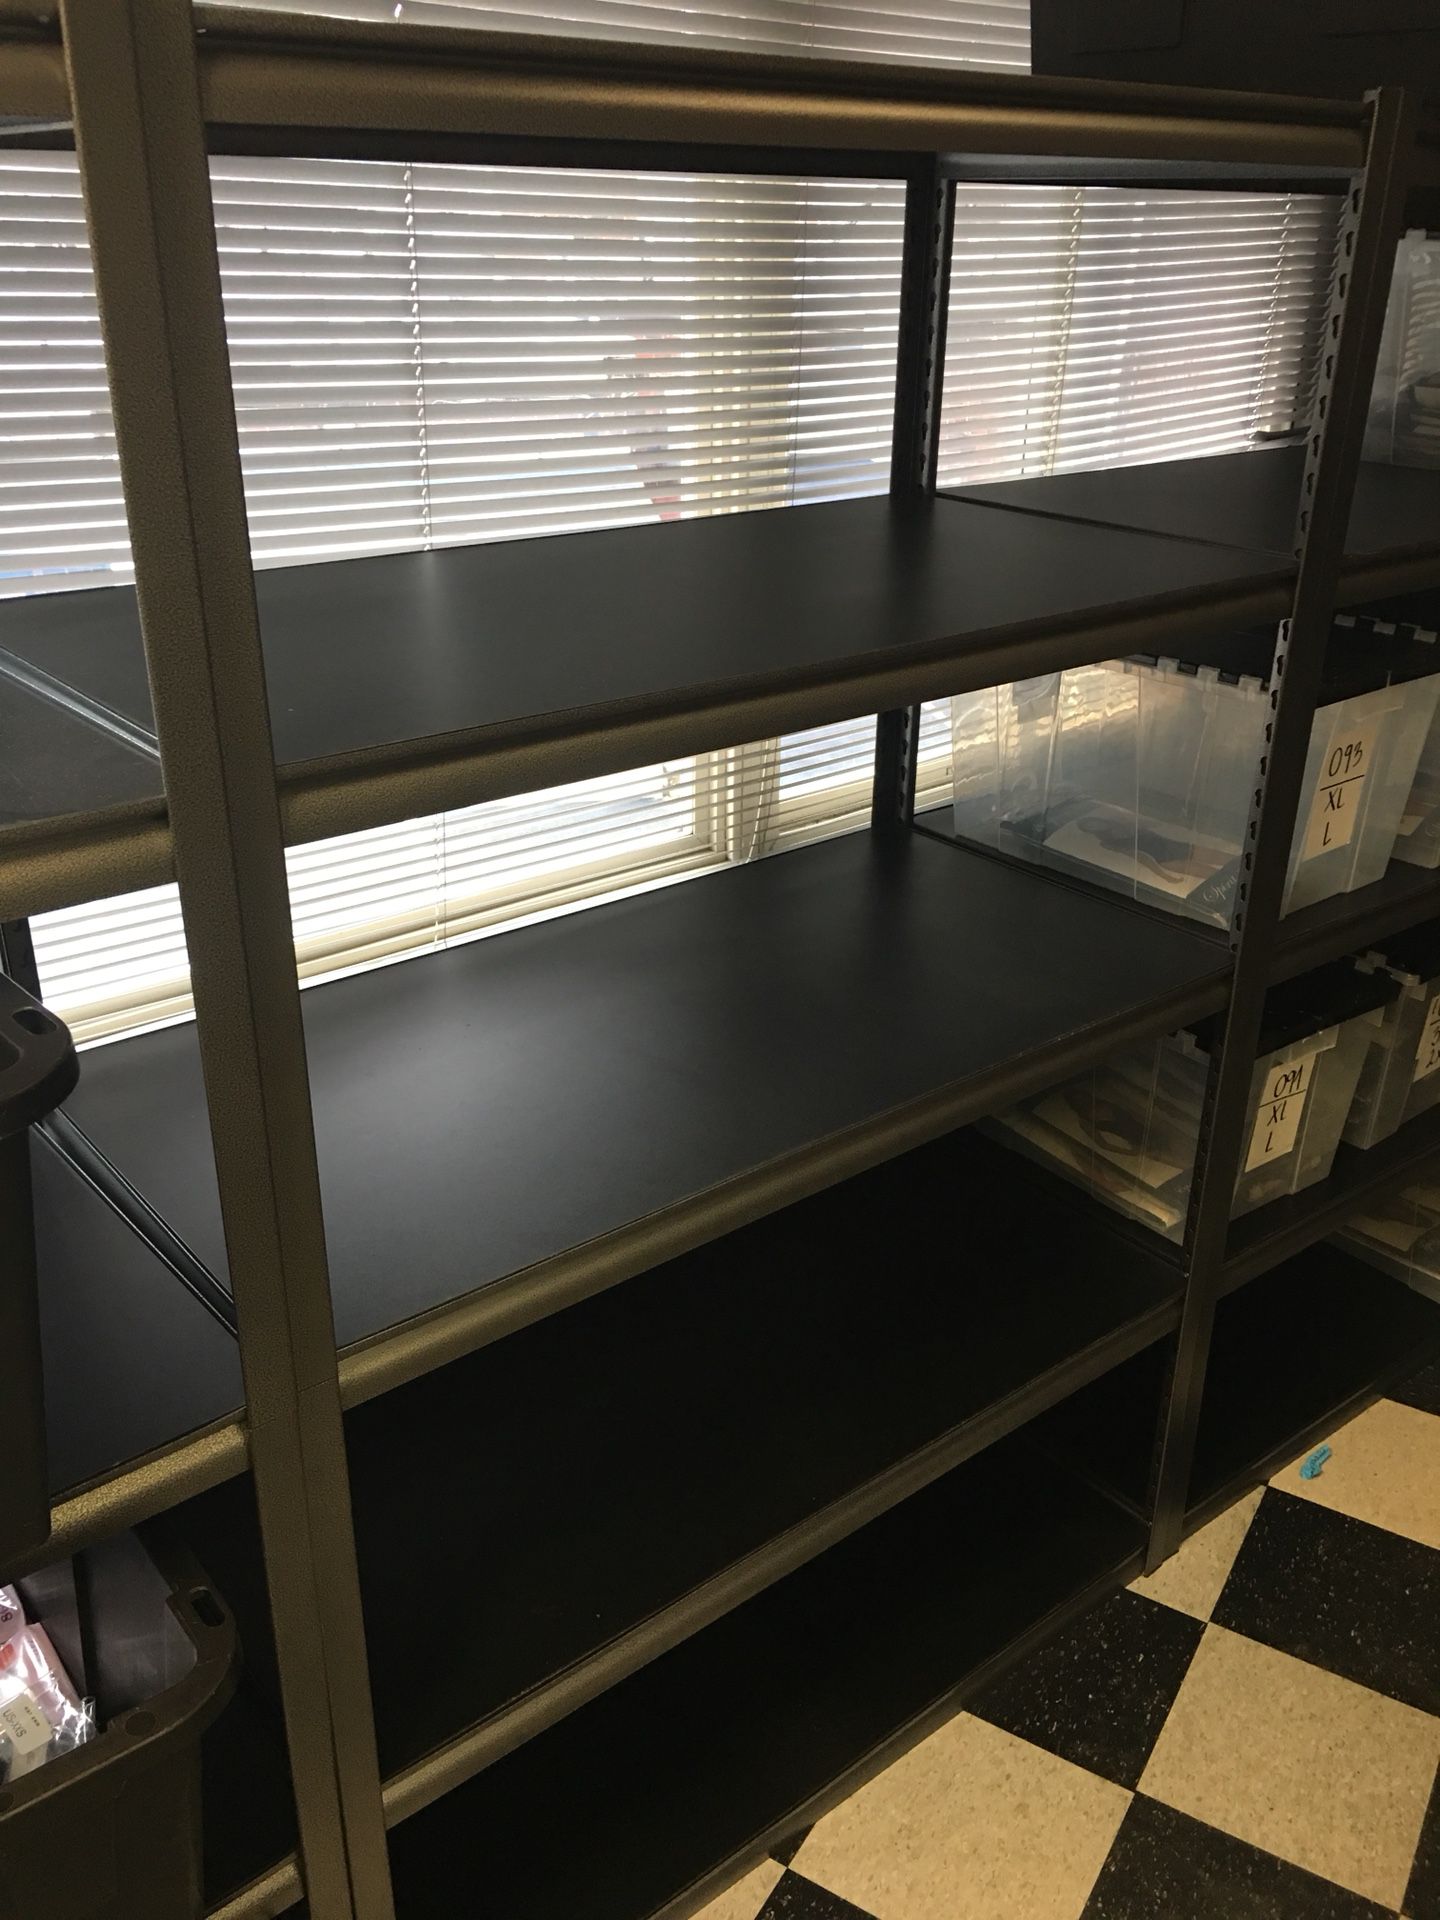 Heavy duty rack 48w x 24d x 72 h with 5 level shelving $15 each (limited quantity)